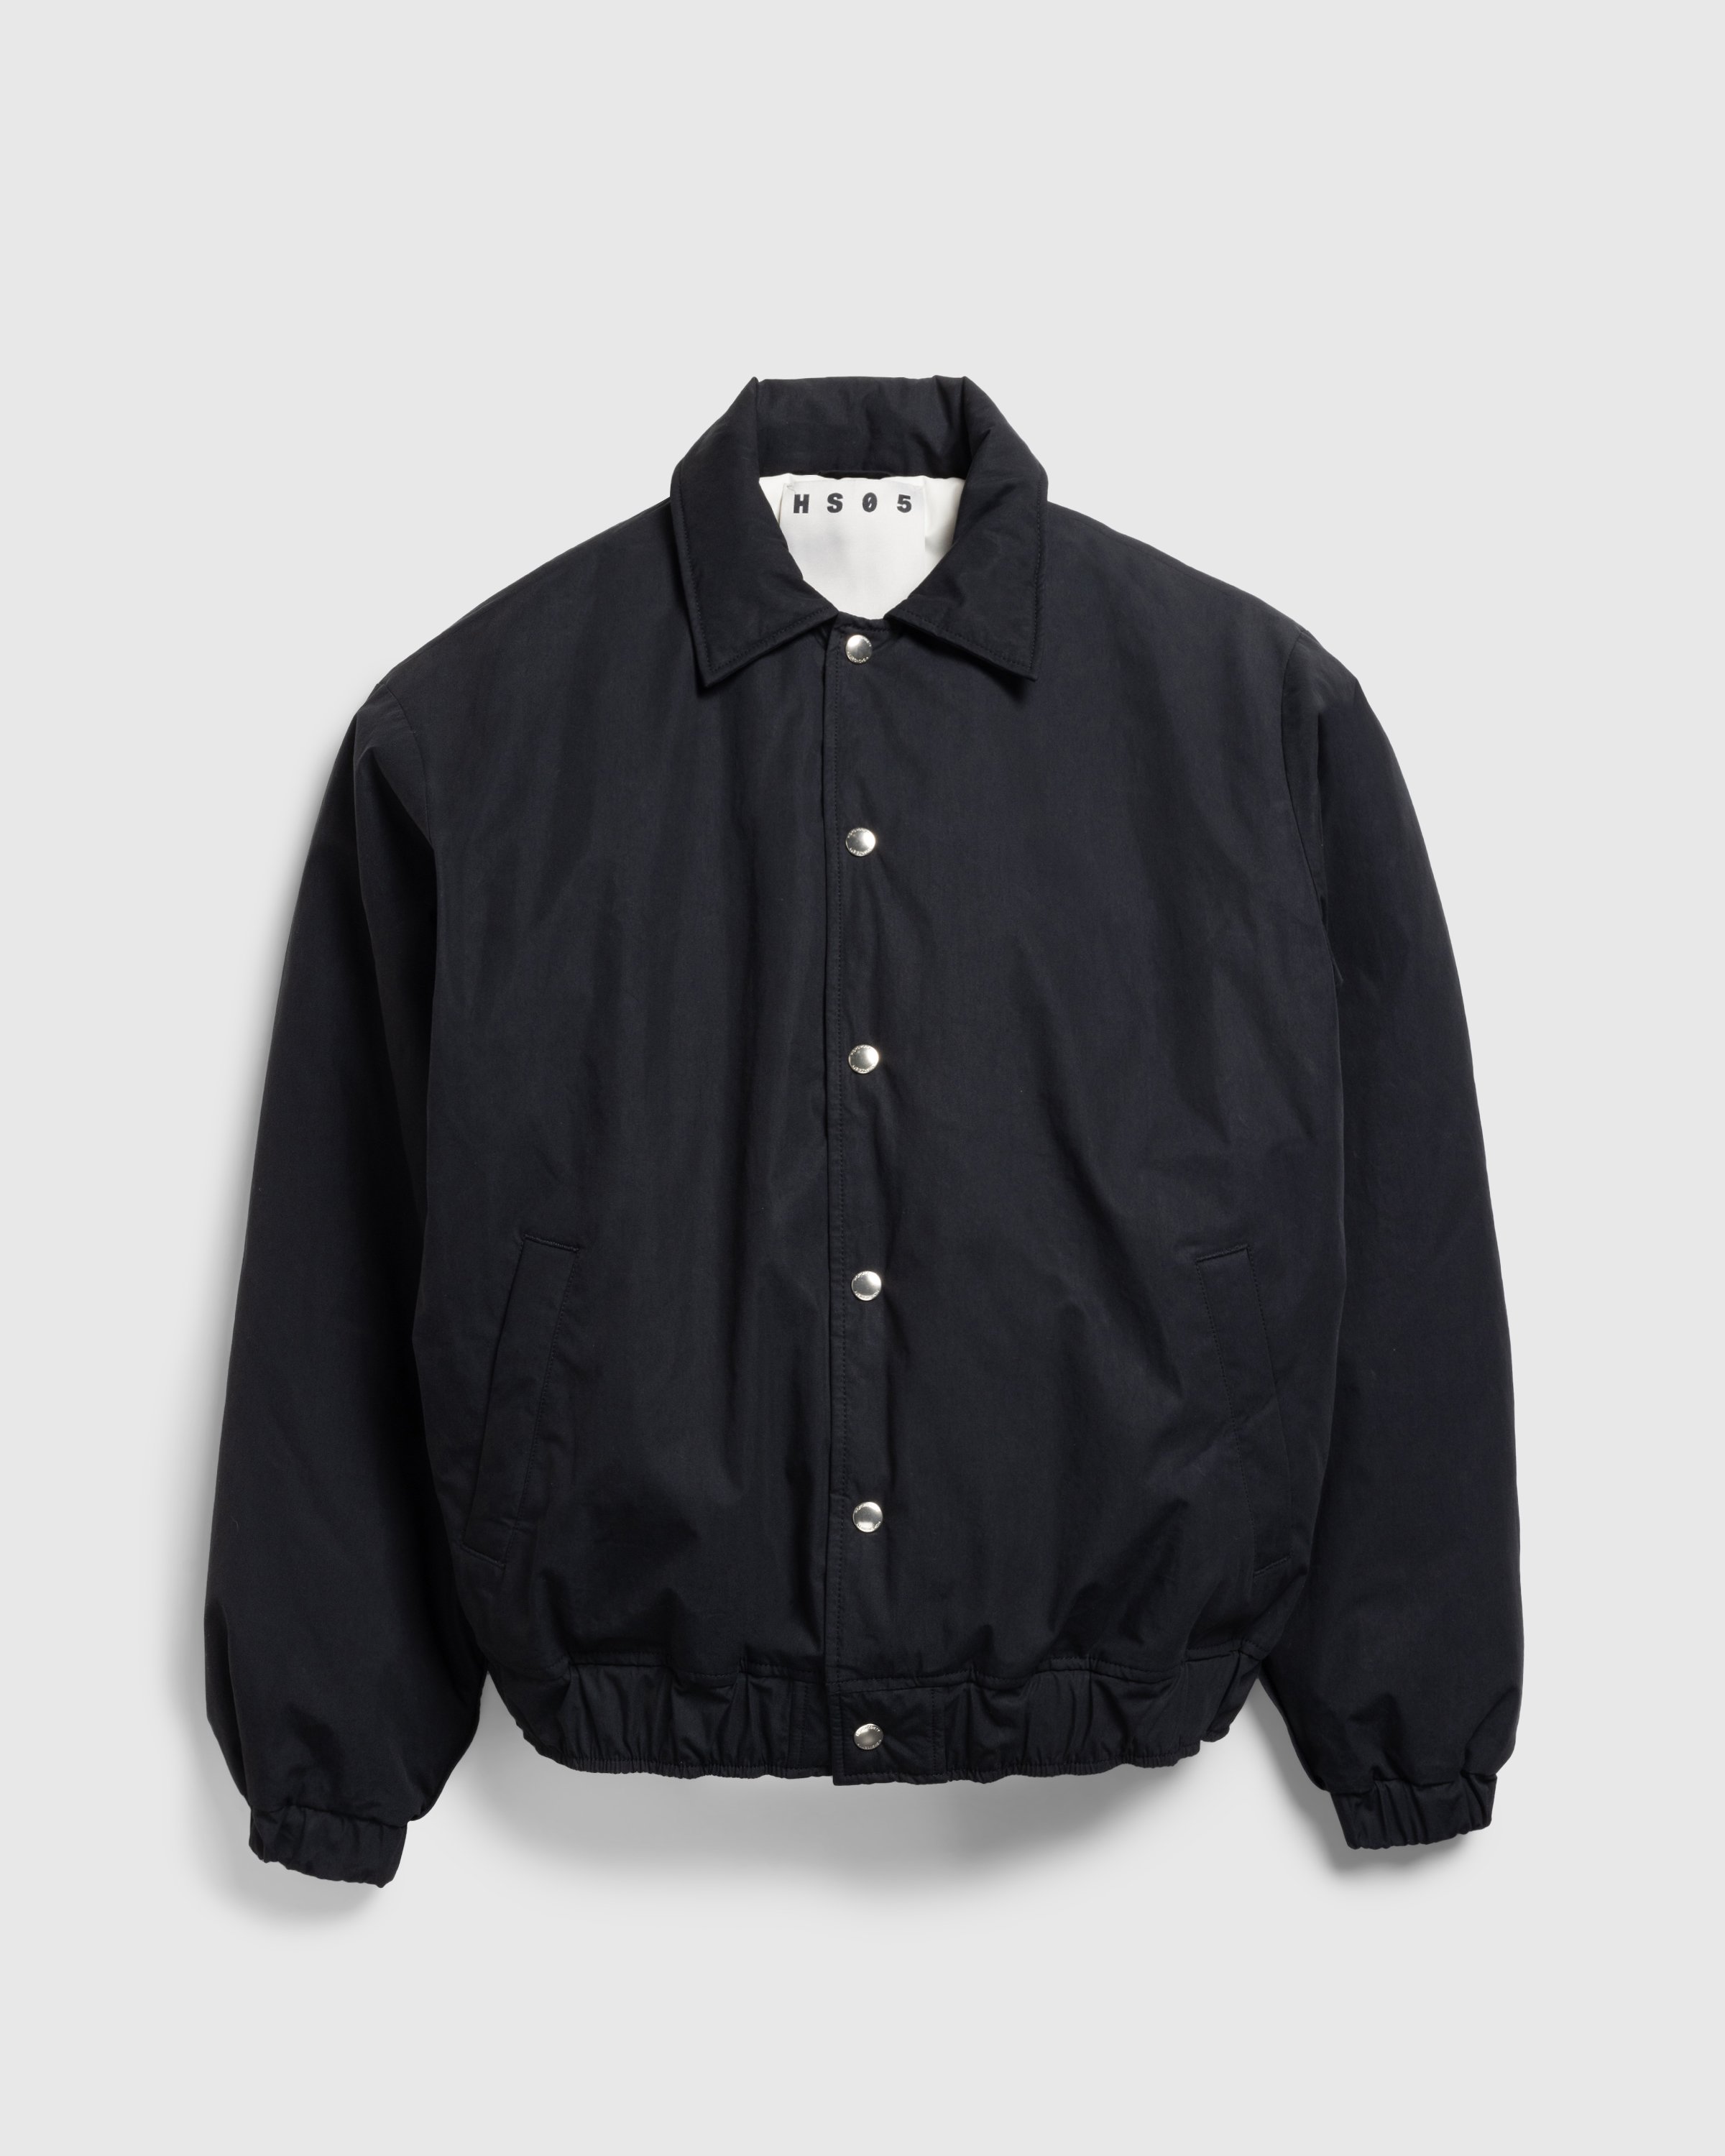 Highsnobiety HS05 - Reverse Piping Insulated Bomber - Clothing - Black - Image 1